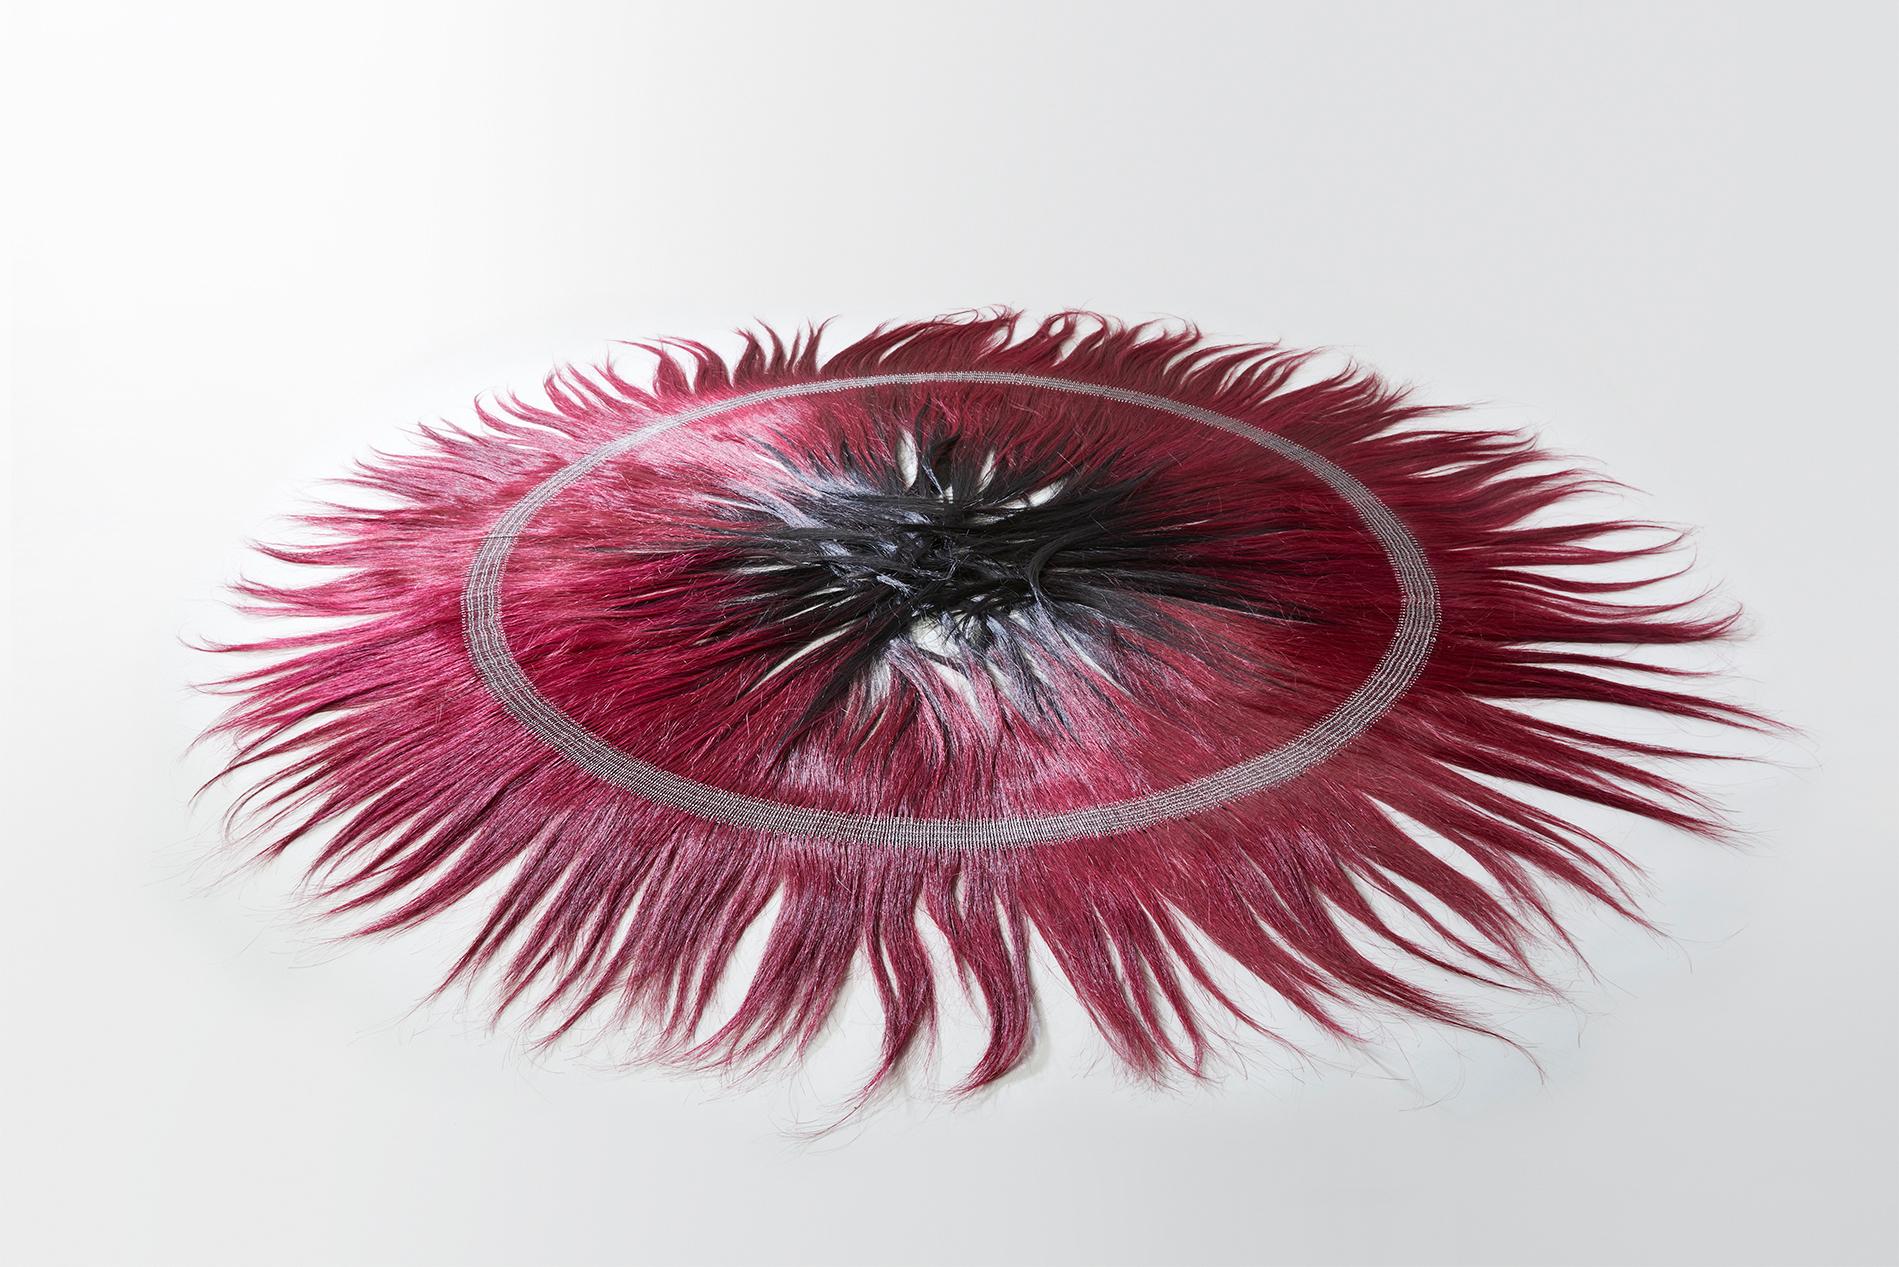 Horsehair Installation Halo Rubis Made in France One of a Kind - Sculpture by Ulrika Liljedahl